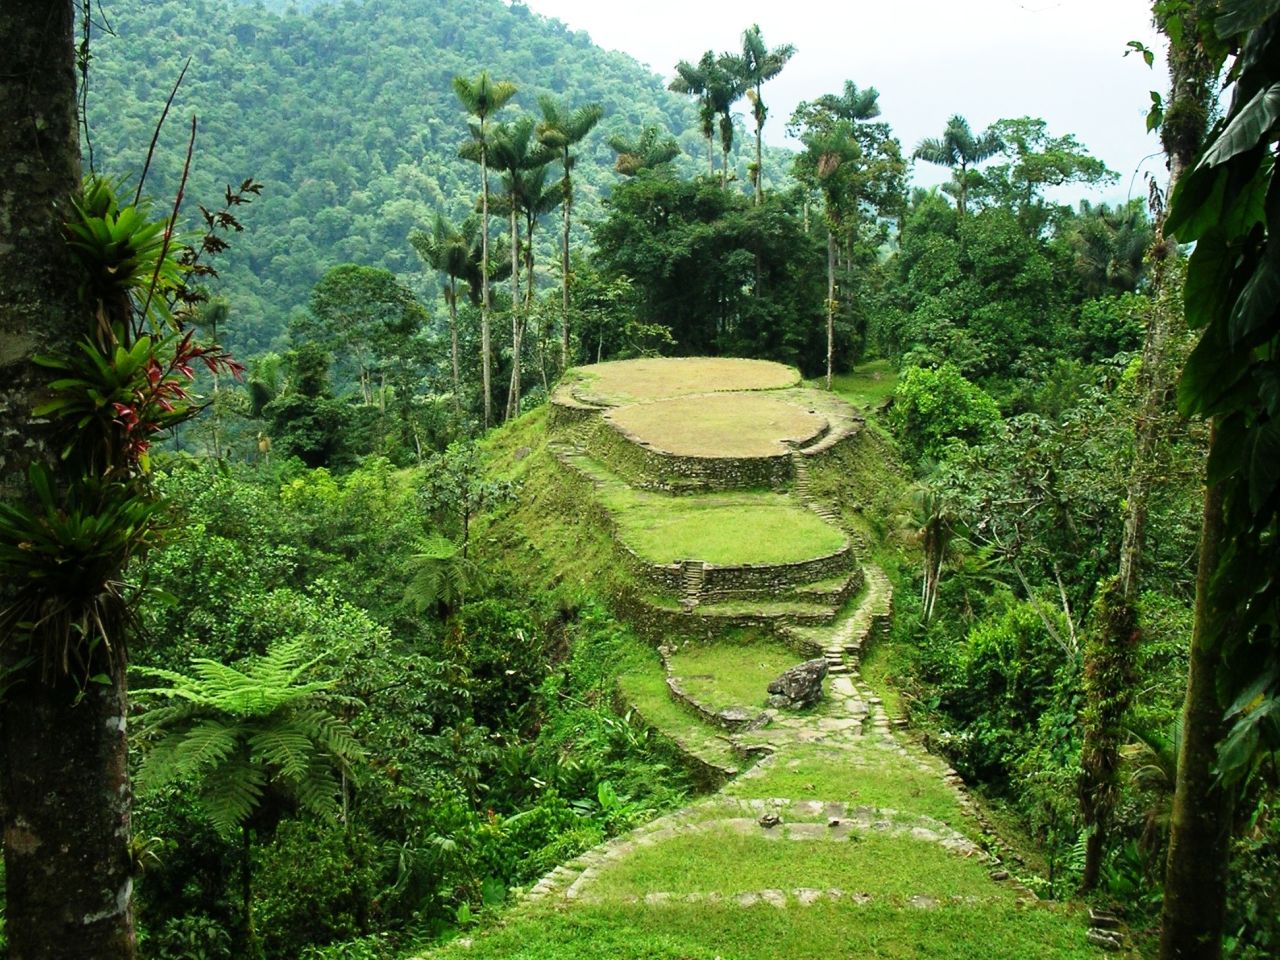 Recently one of the world's more intimidating destinations, Colombia's improving security situation has doubled its annual influx of tourists. Tours to Ciudad Perdida ("Lost City") in Sierra Nevada have soared, leading some to anoint it the next Machu Picchu.